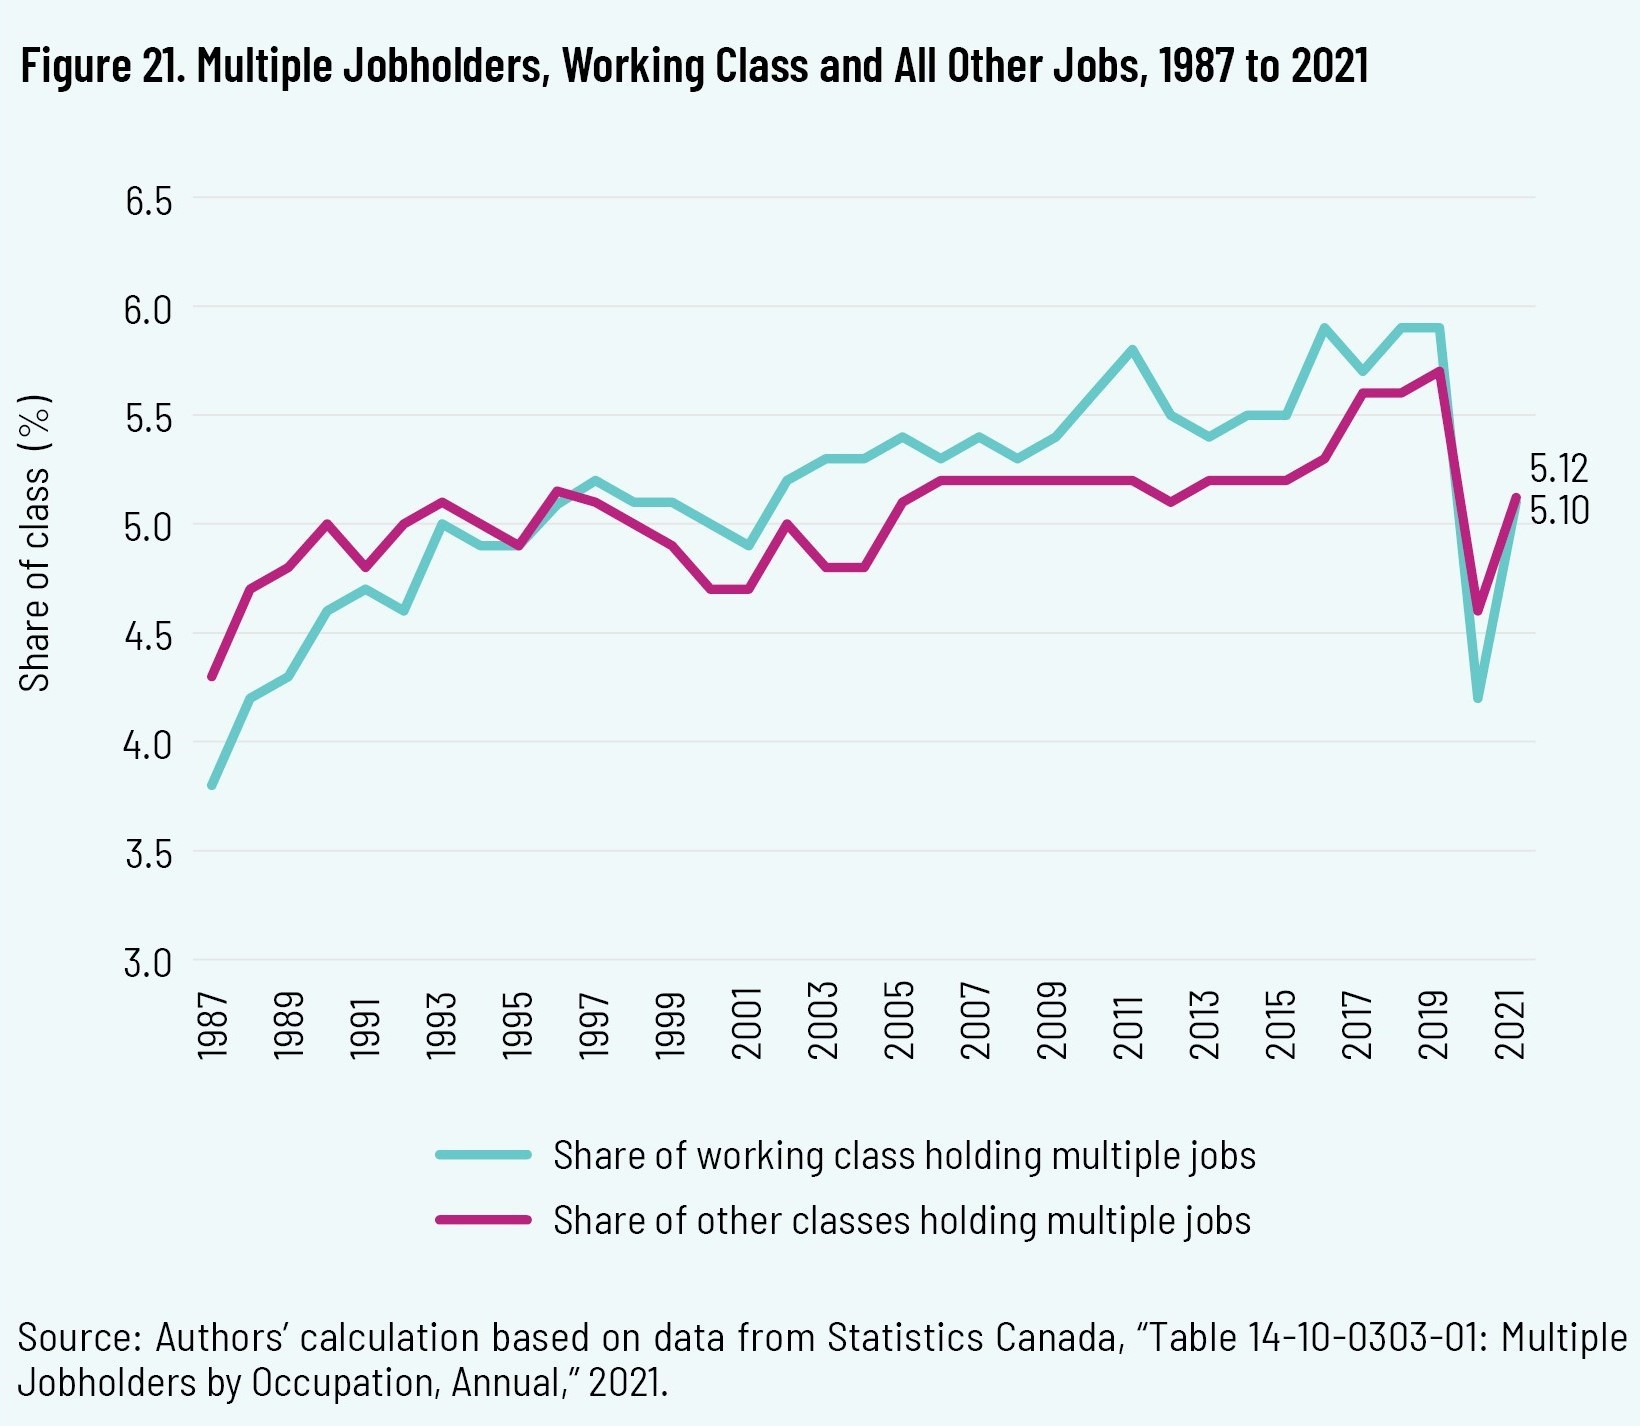 Figure 21. Multiple Jobholders, Working Class and All Other Jobs, 1987 to 2021